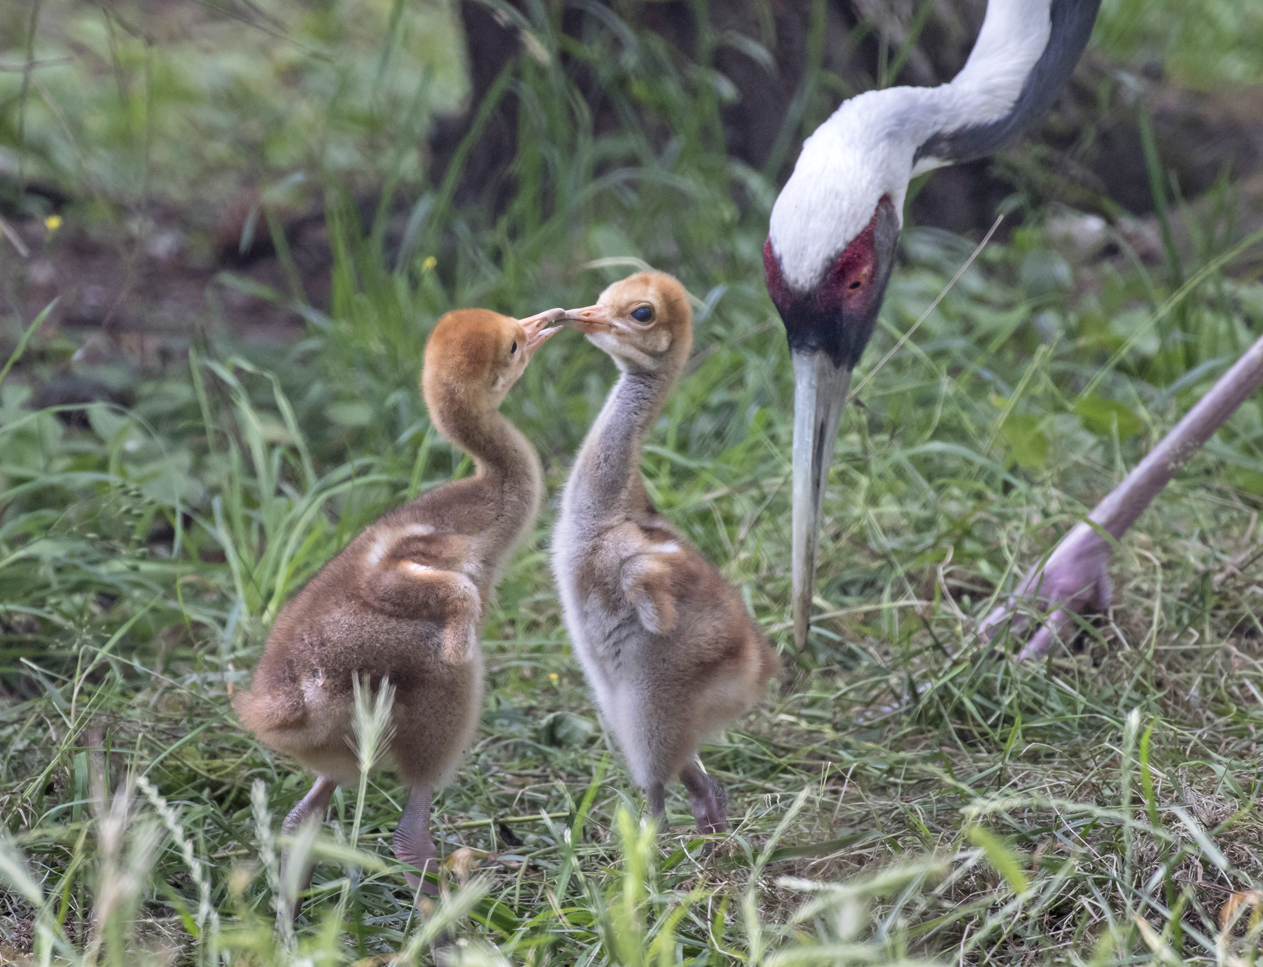 White-naped crane chicks hatch! A symbol of hope for a vulnerable species pic